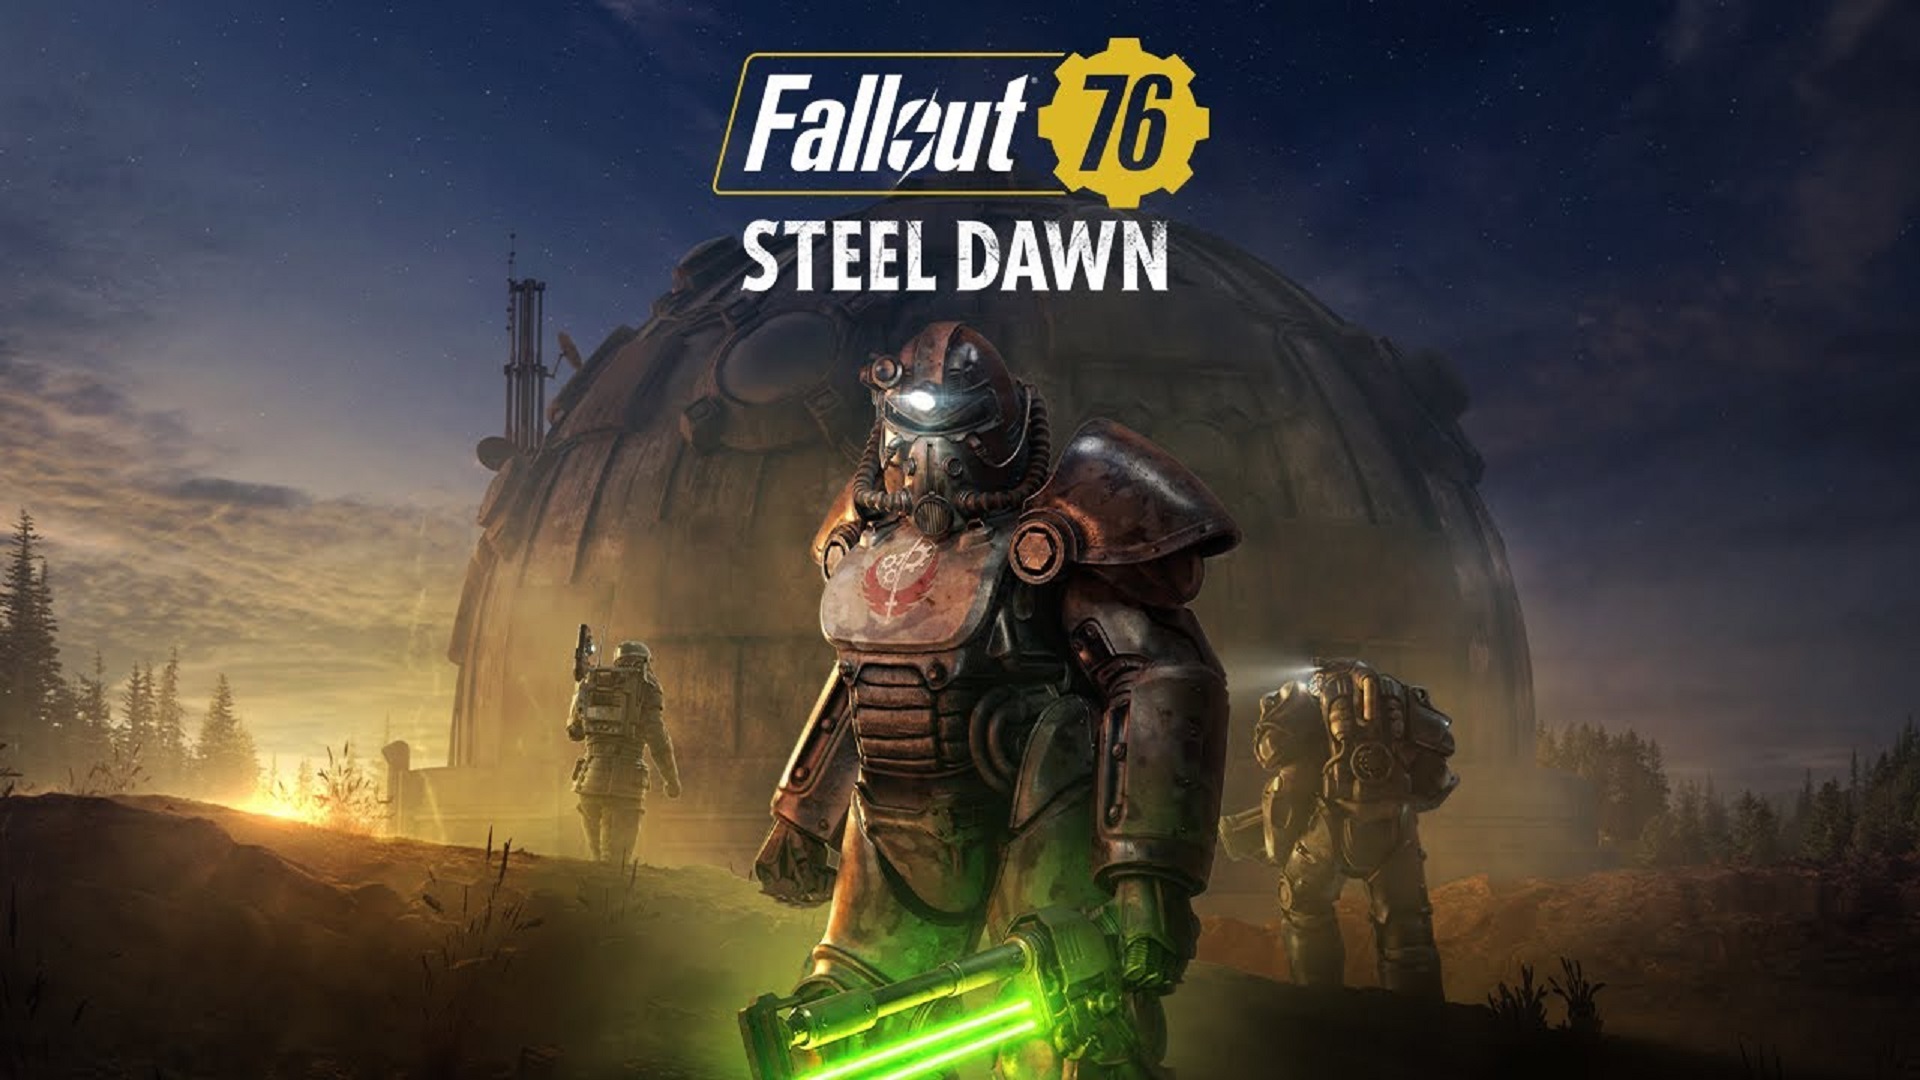 Fallout 76 Steel Dawn Update Is Out Now